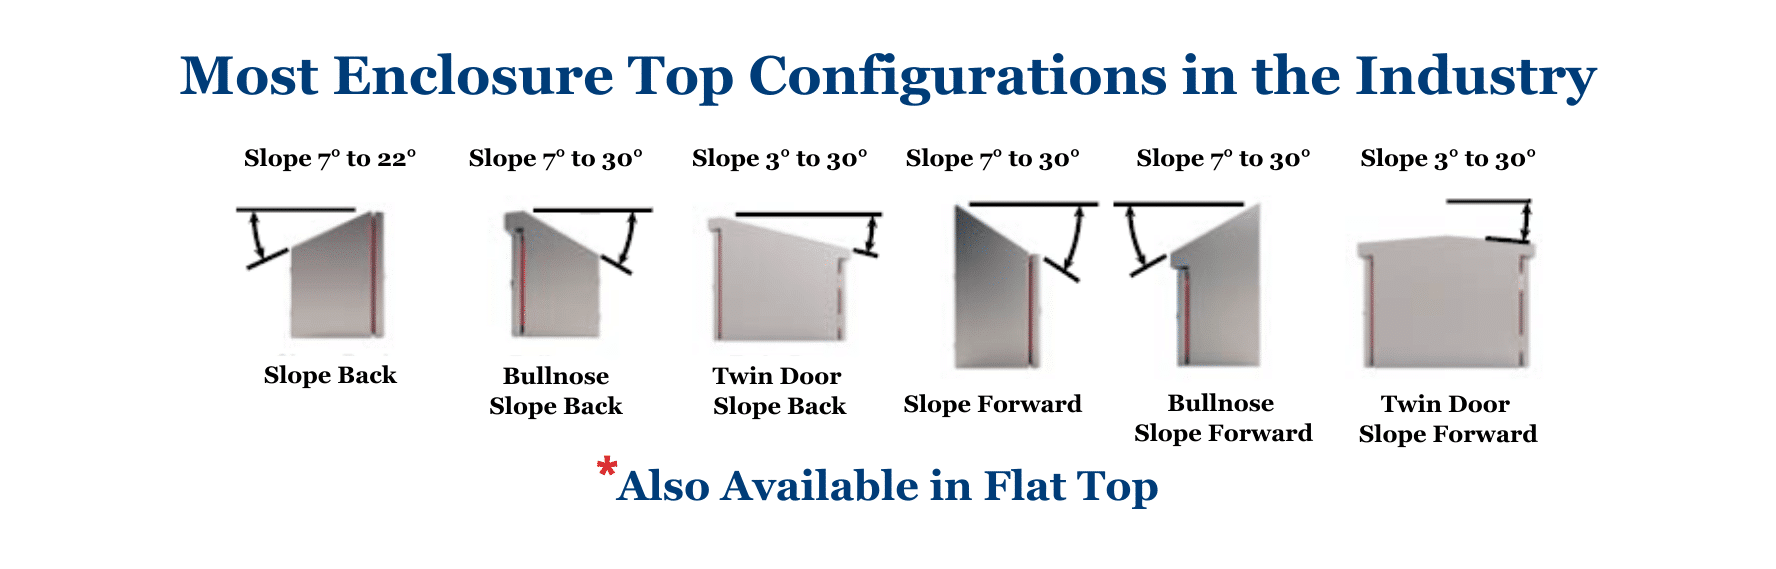 Top Configurations Slide 1 | Custom Stainless Enclosures, Inc.